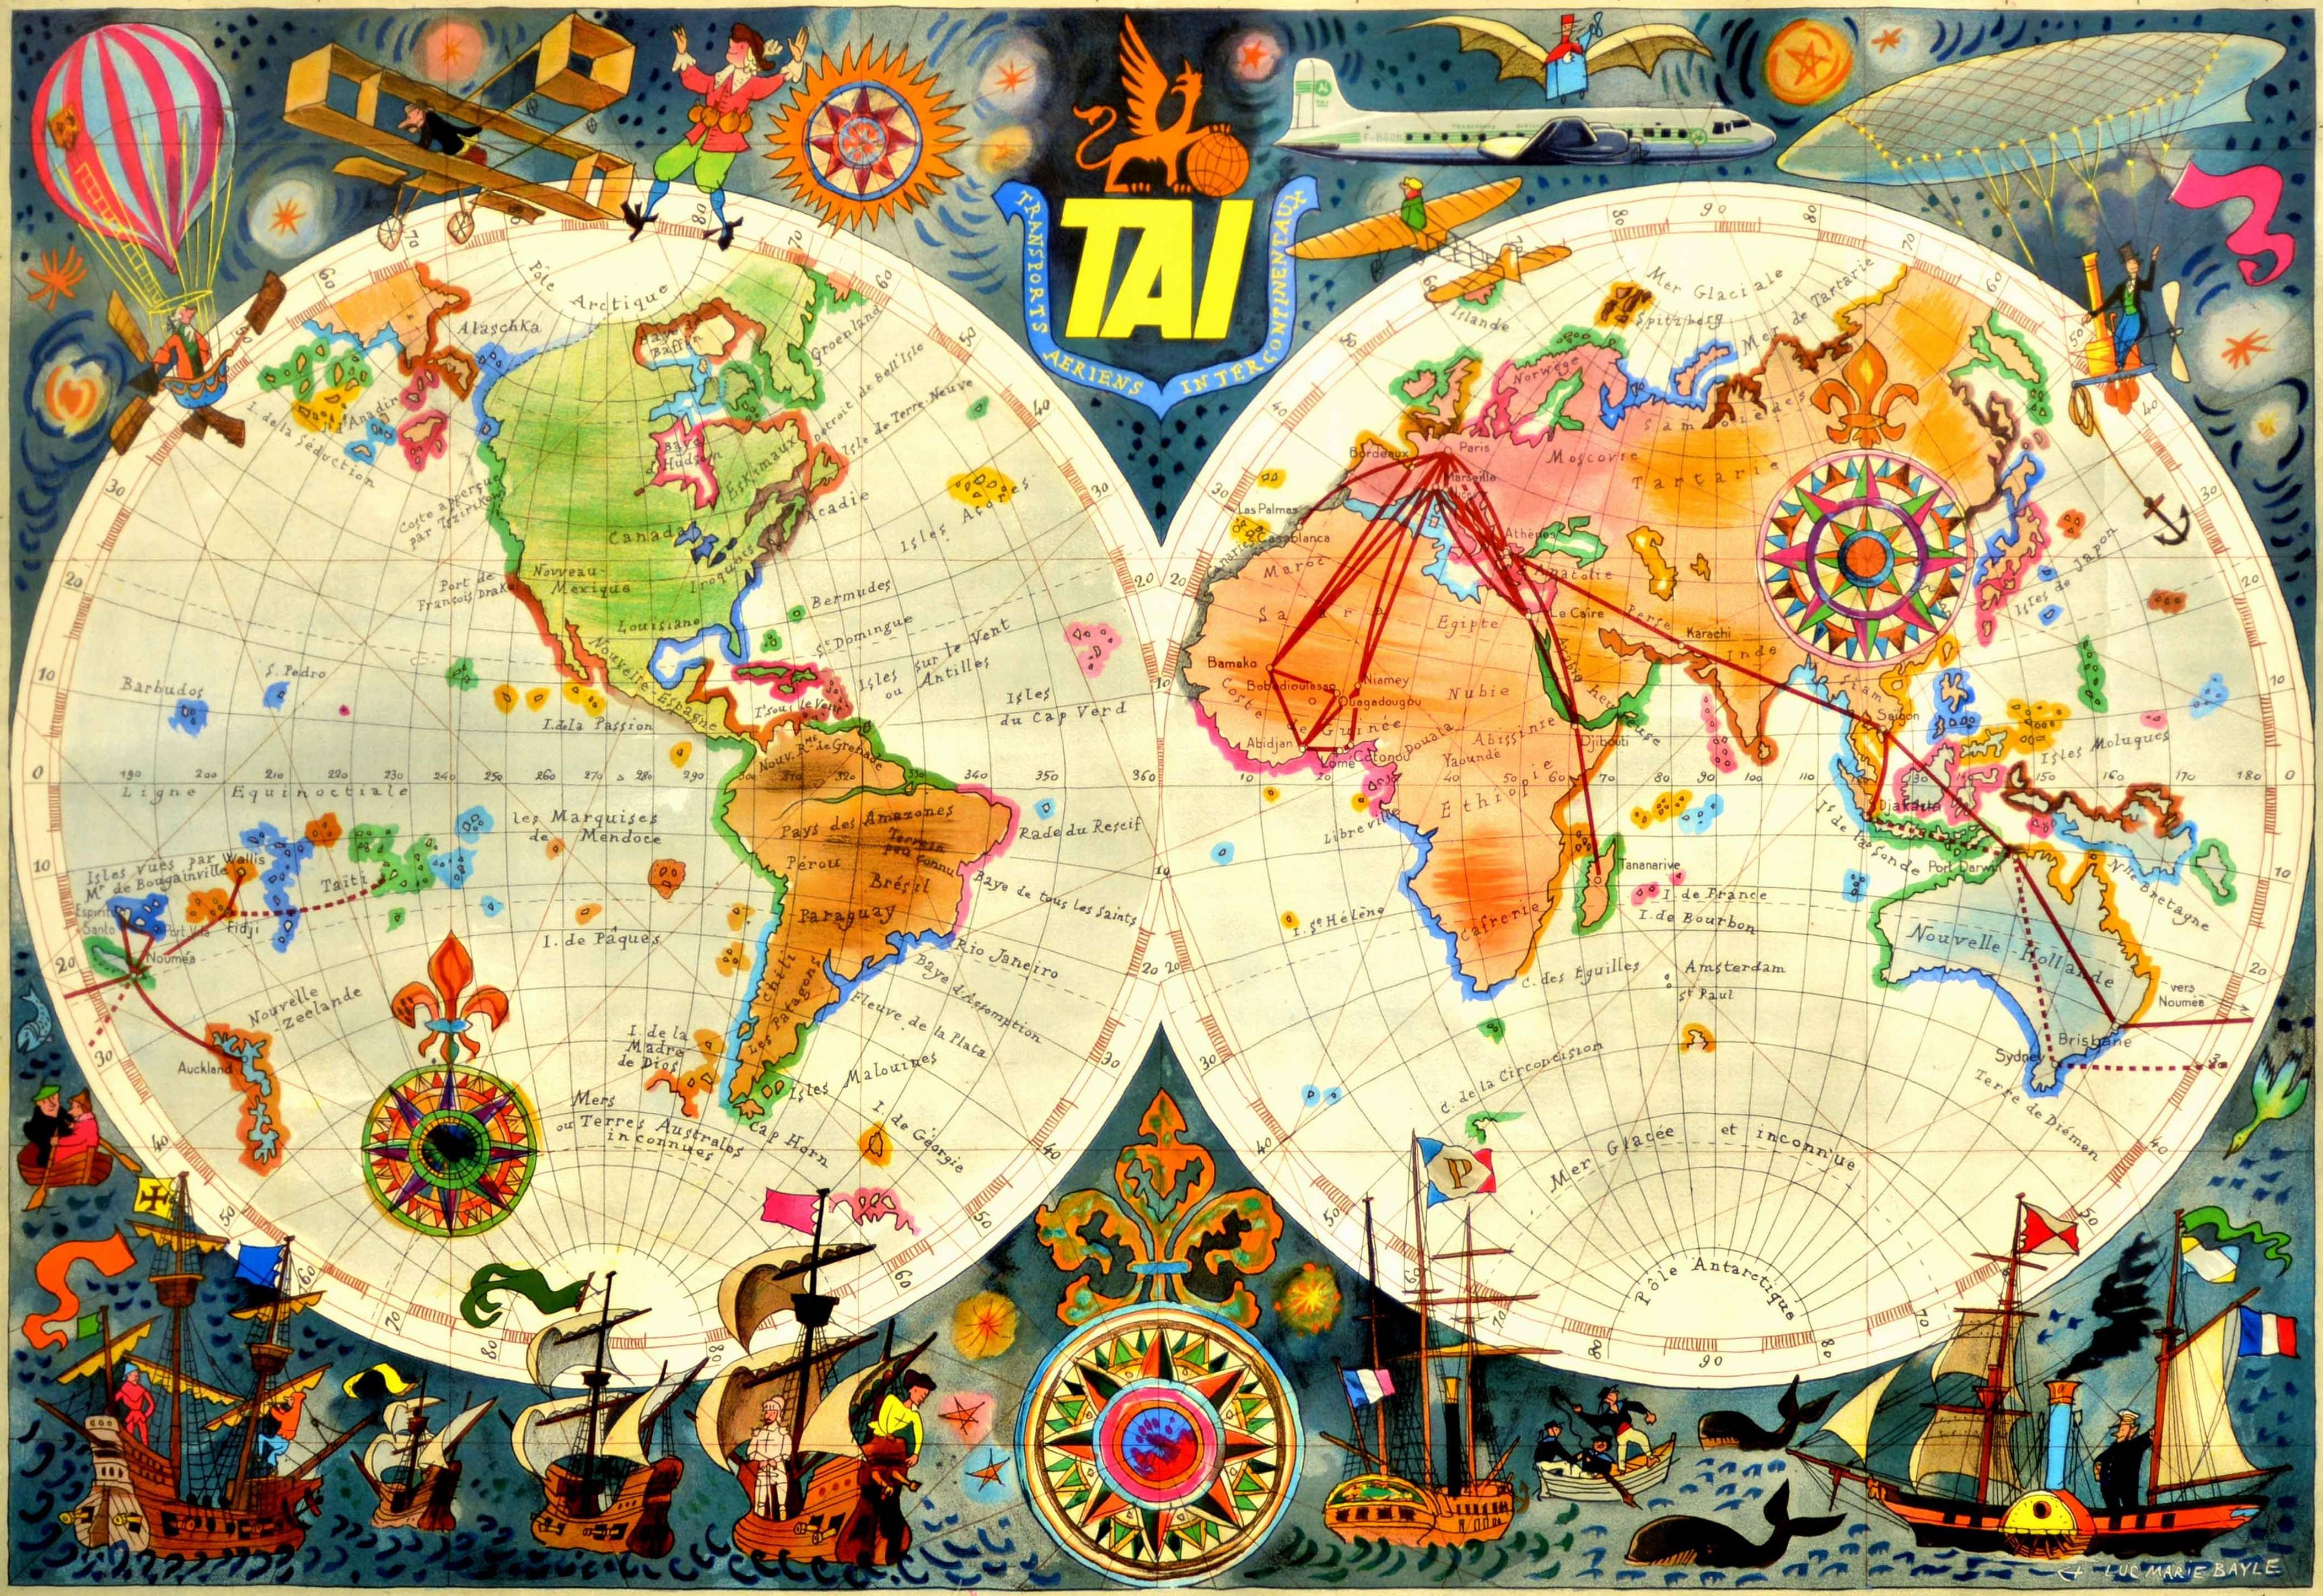 Original vintage travel advertising poster for TAI Transports Aeriens Intercontinentaux Map of the World by Luc-Marie Bayle (1914-2000) featuring a colorful planisphere map showing the airline's routes around the globe surrounded by fun images of